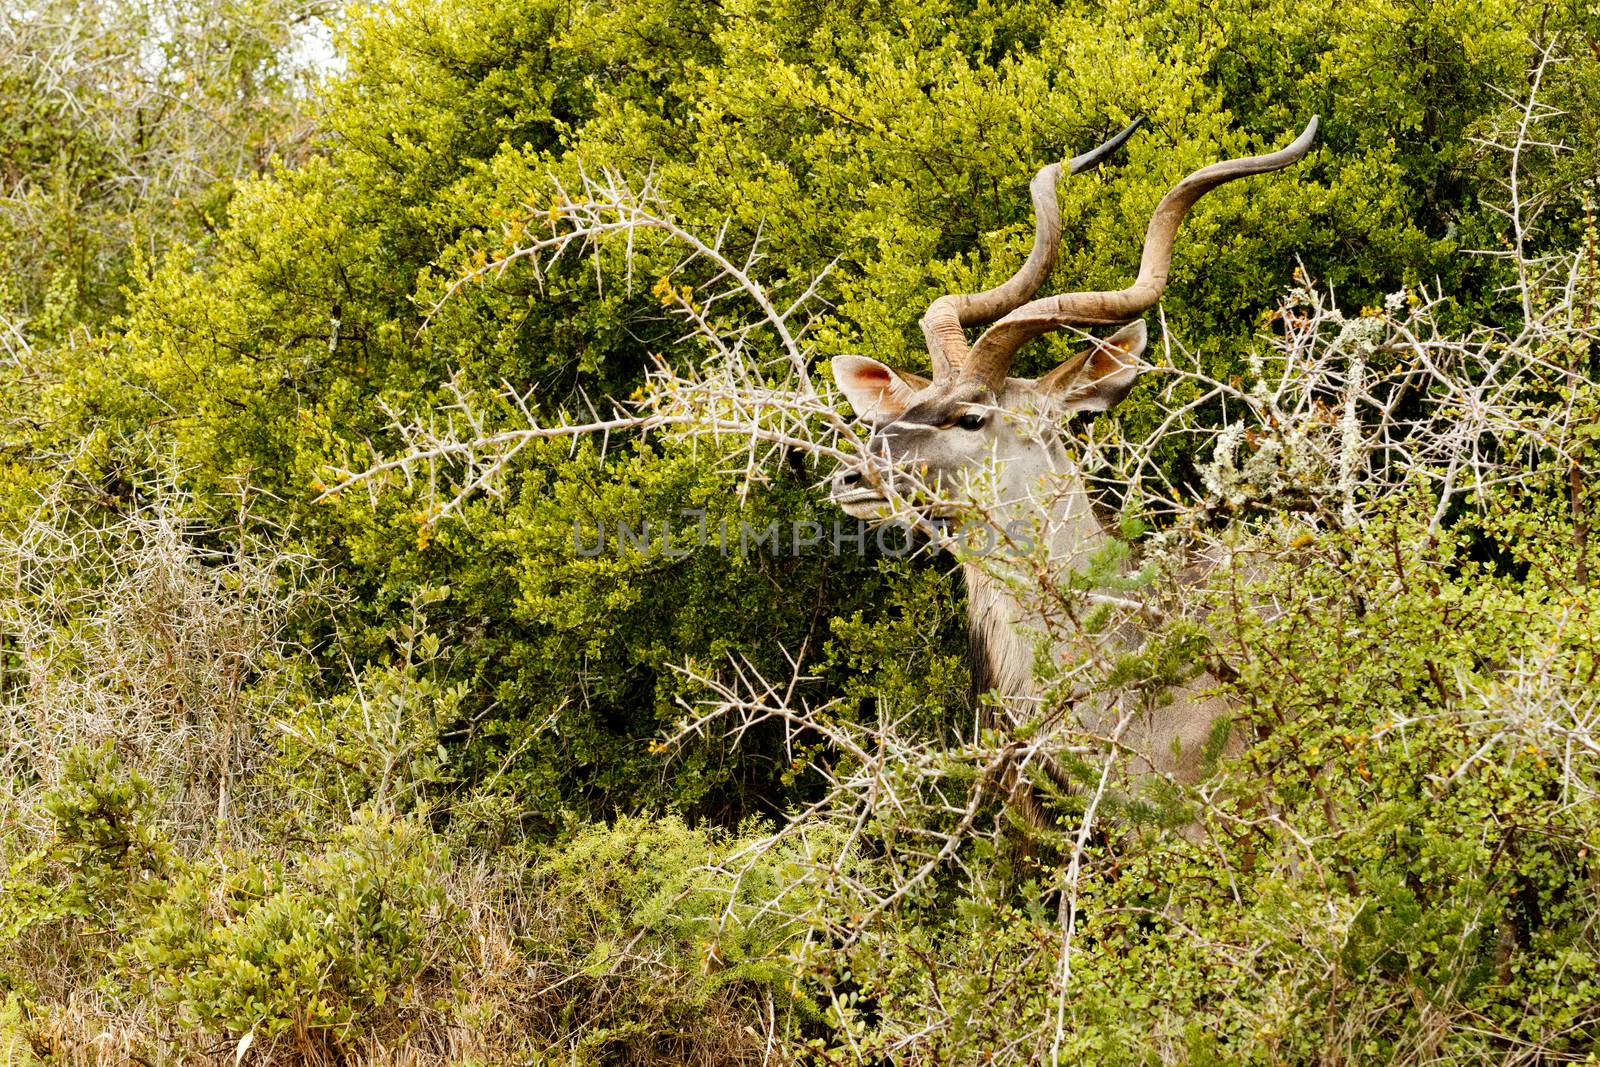 Greater Kudu hiding behind the thorny bushes by markdescande